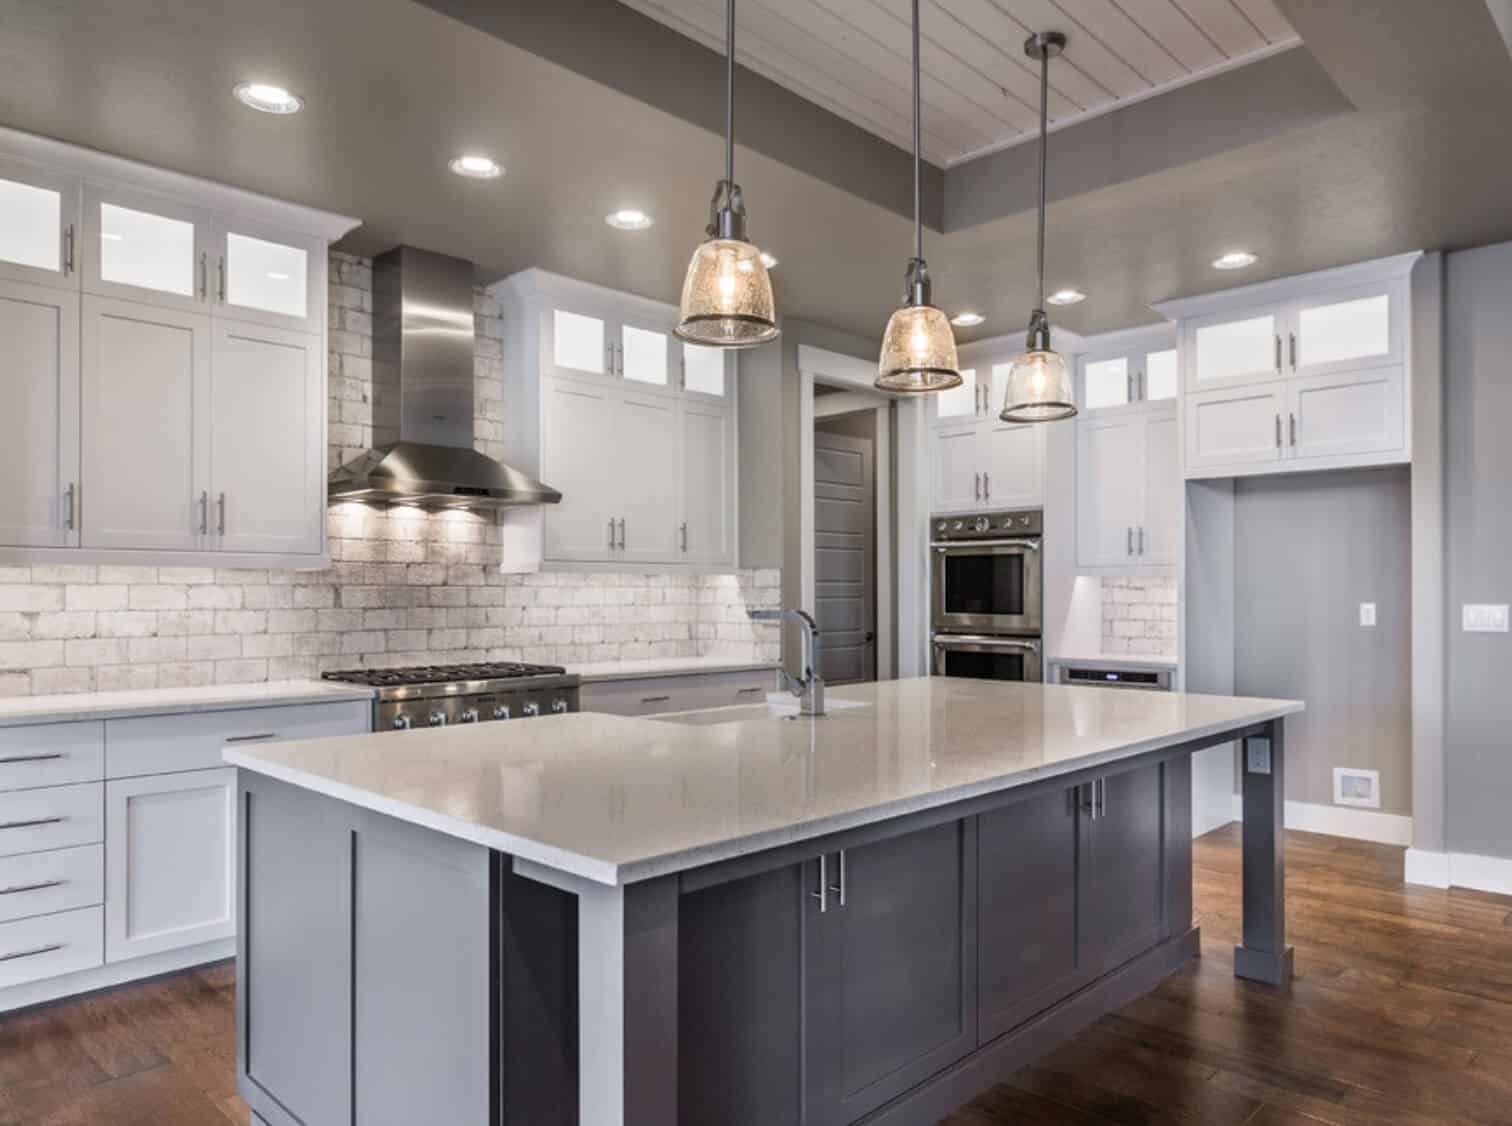 kitchen modern color contemporary ceiling neutral farmhouse designs interior cook colors cabinets grey cabinet sure every fall choose houses rustic